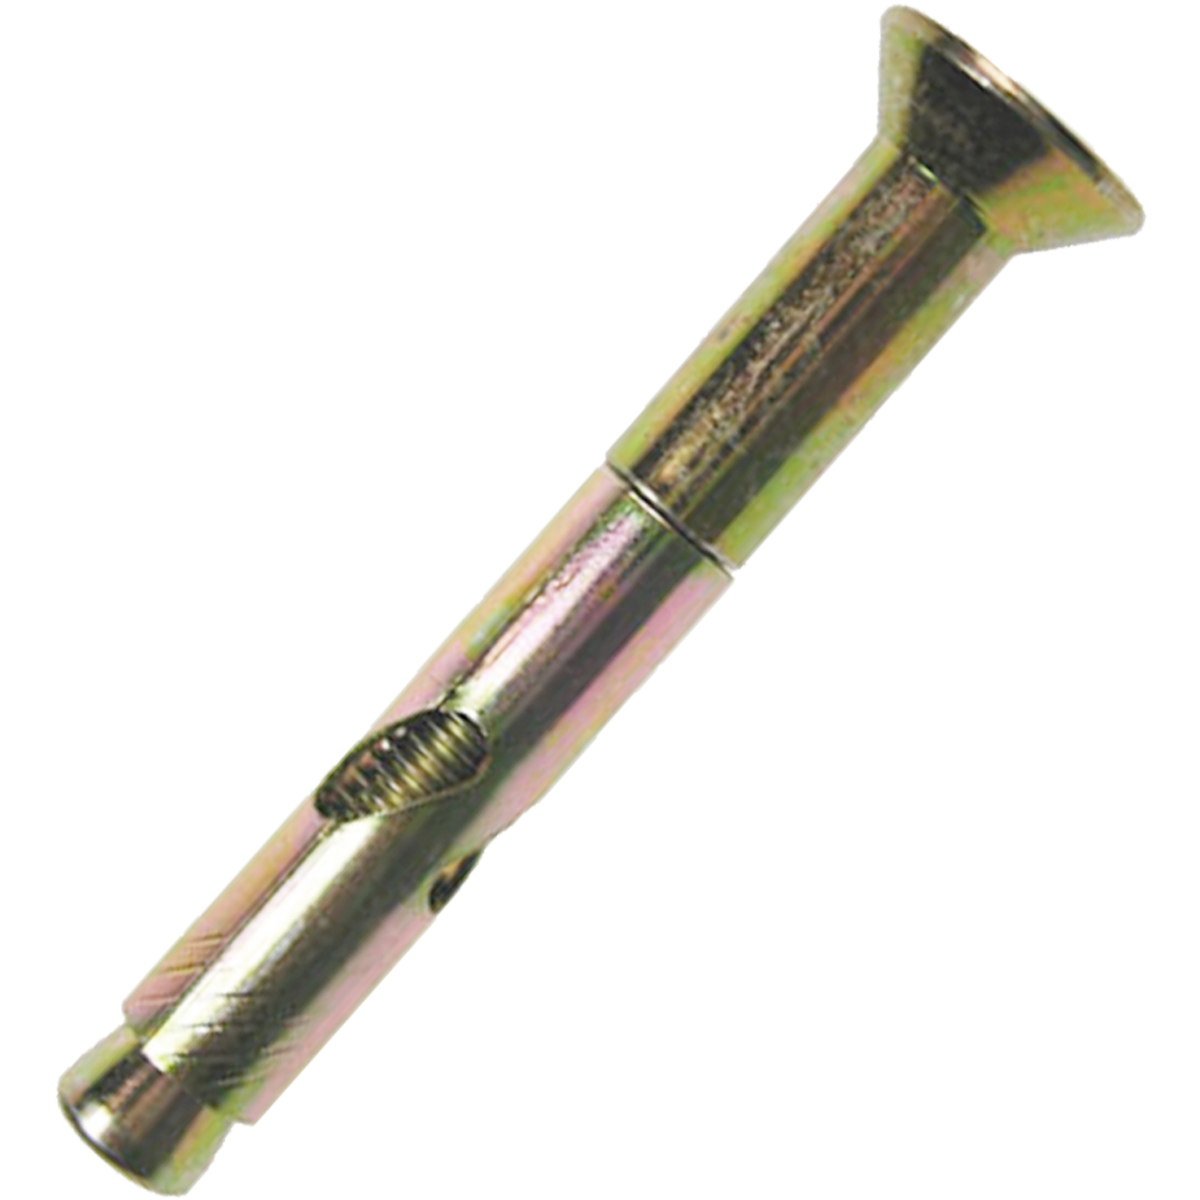 Countersunk sleeve anchor bolts. Used in concrete, stone, and brickwork